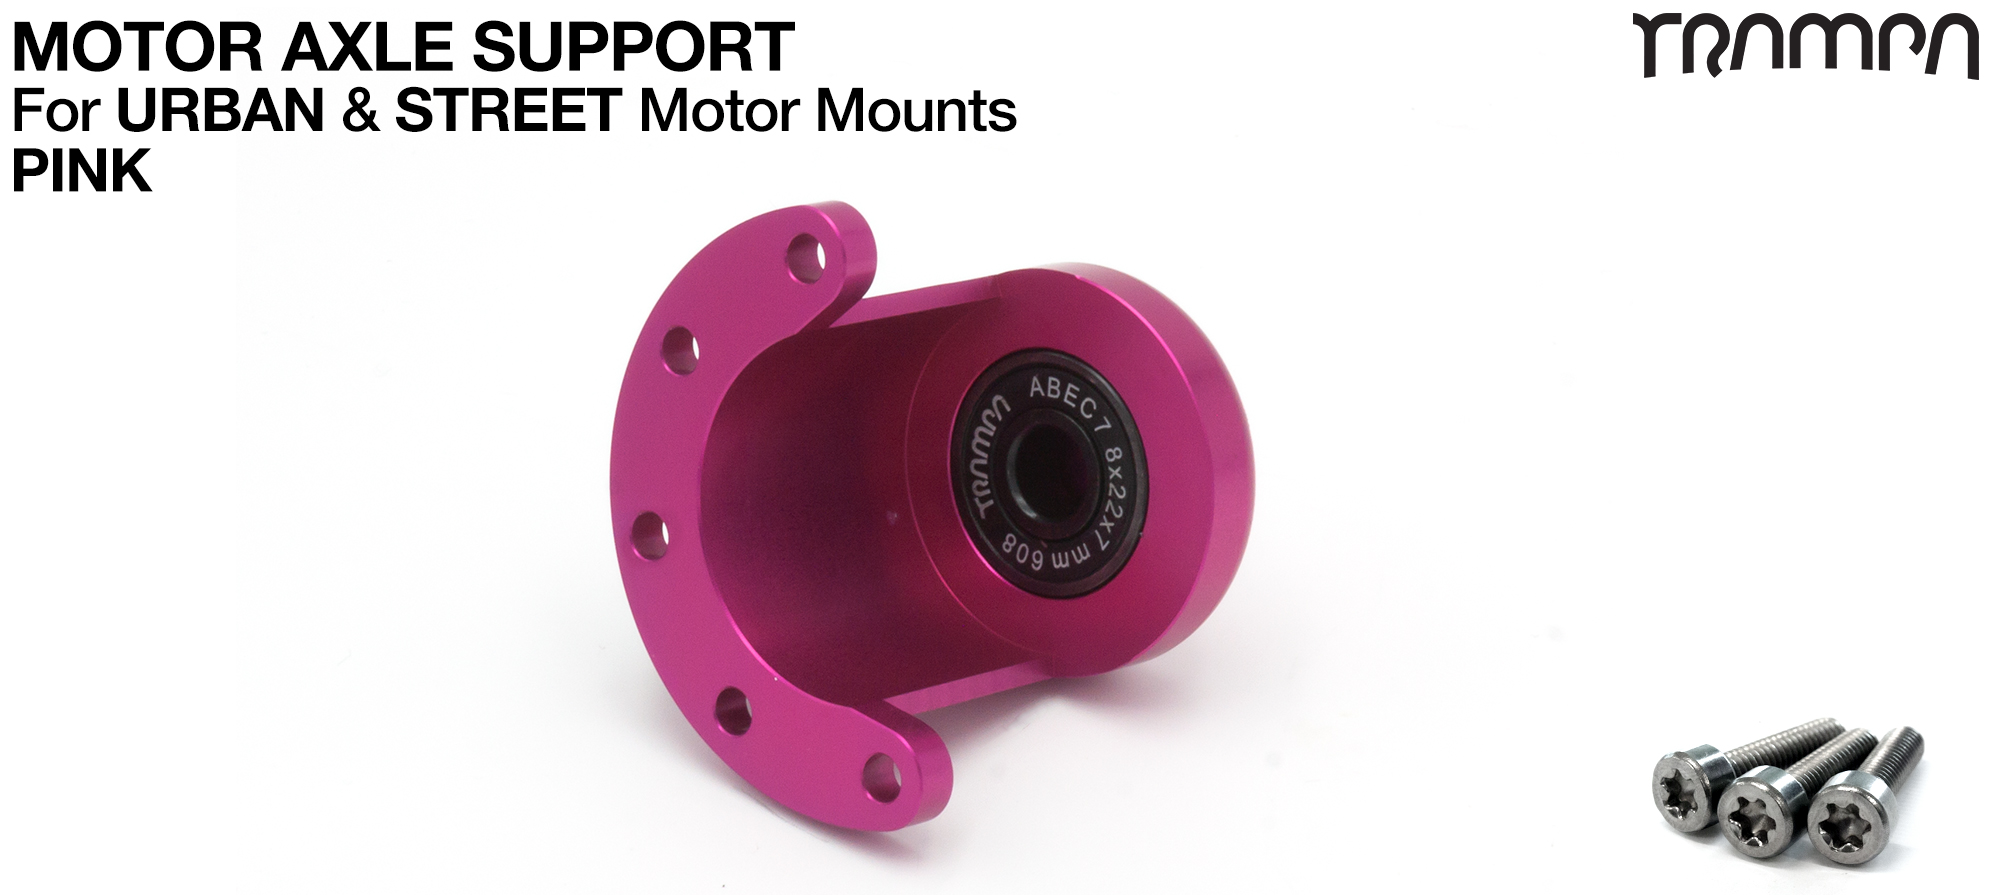 Universal Motor Axle Support Housing - PINK 